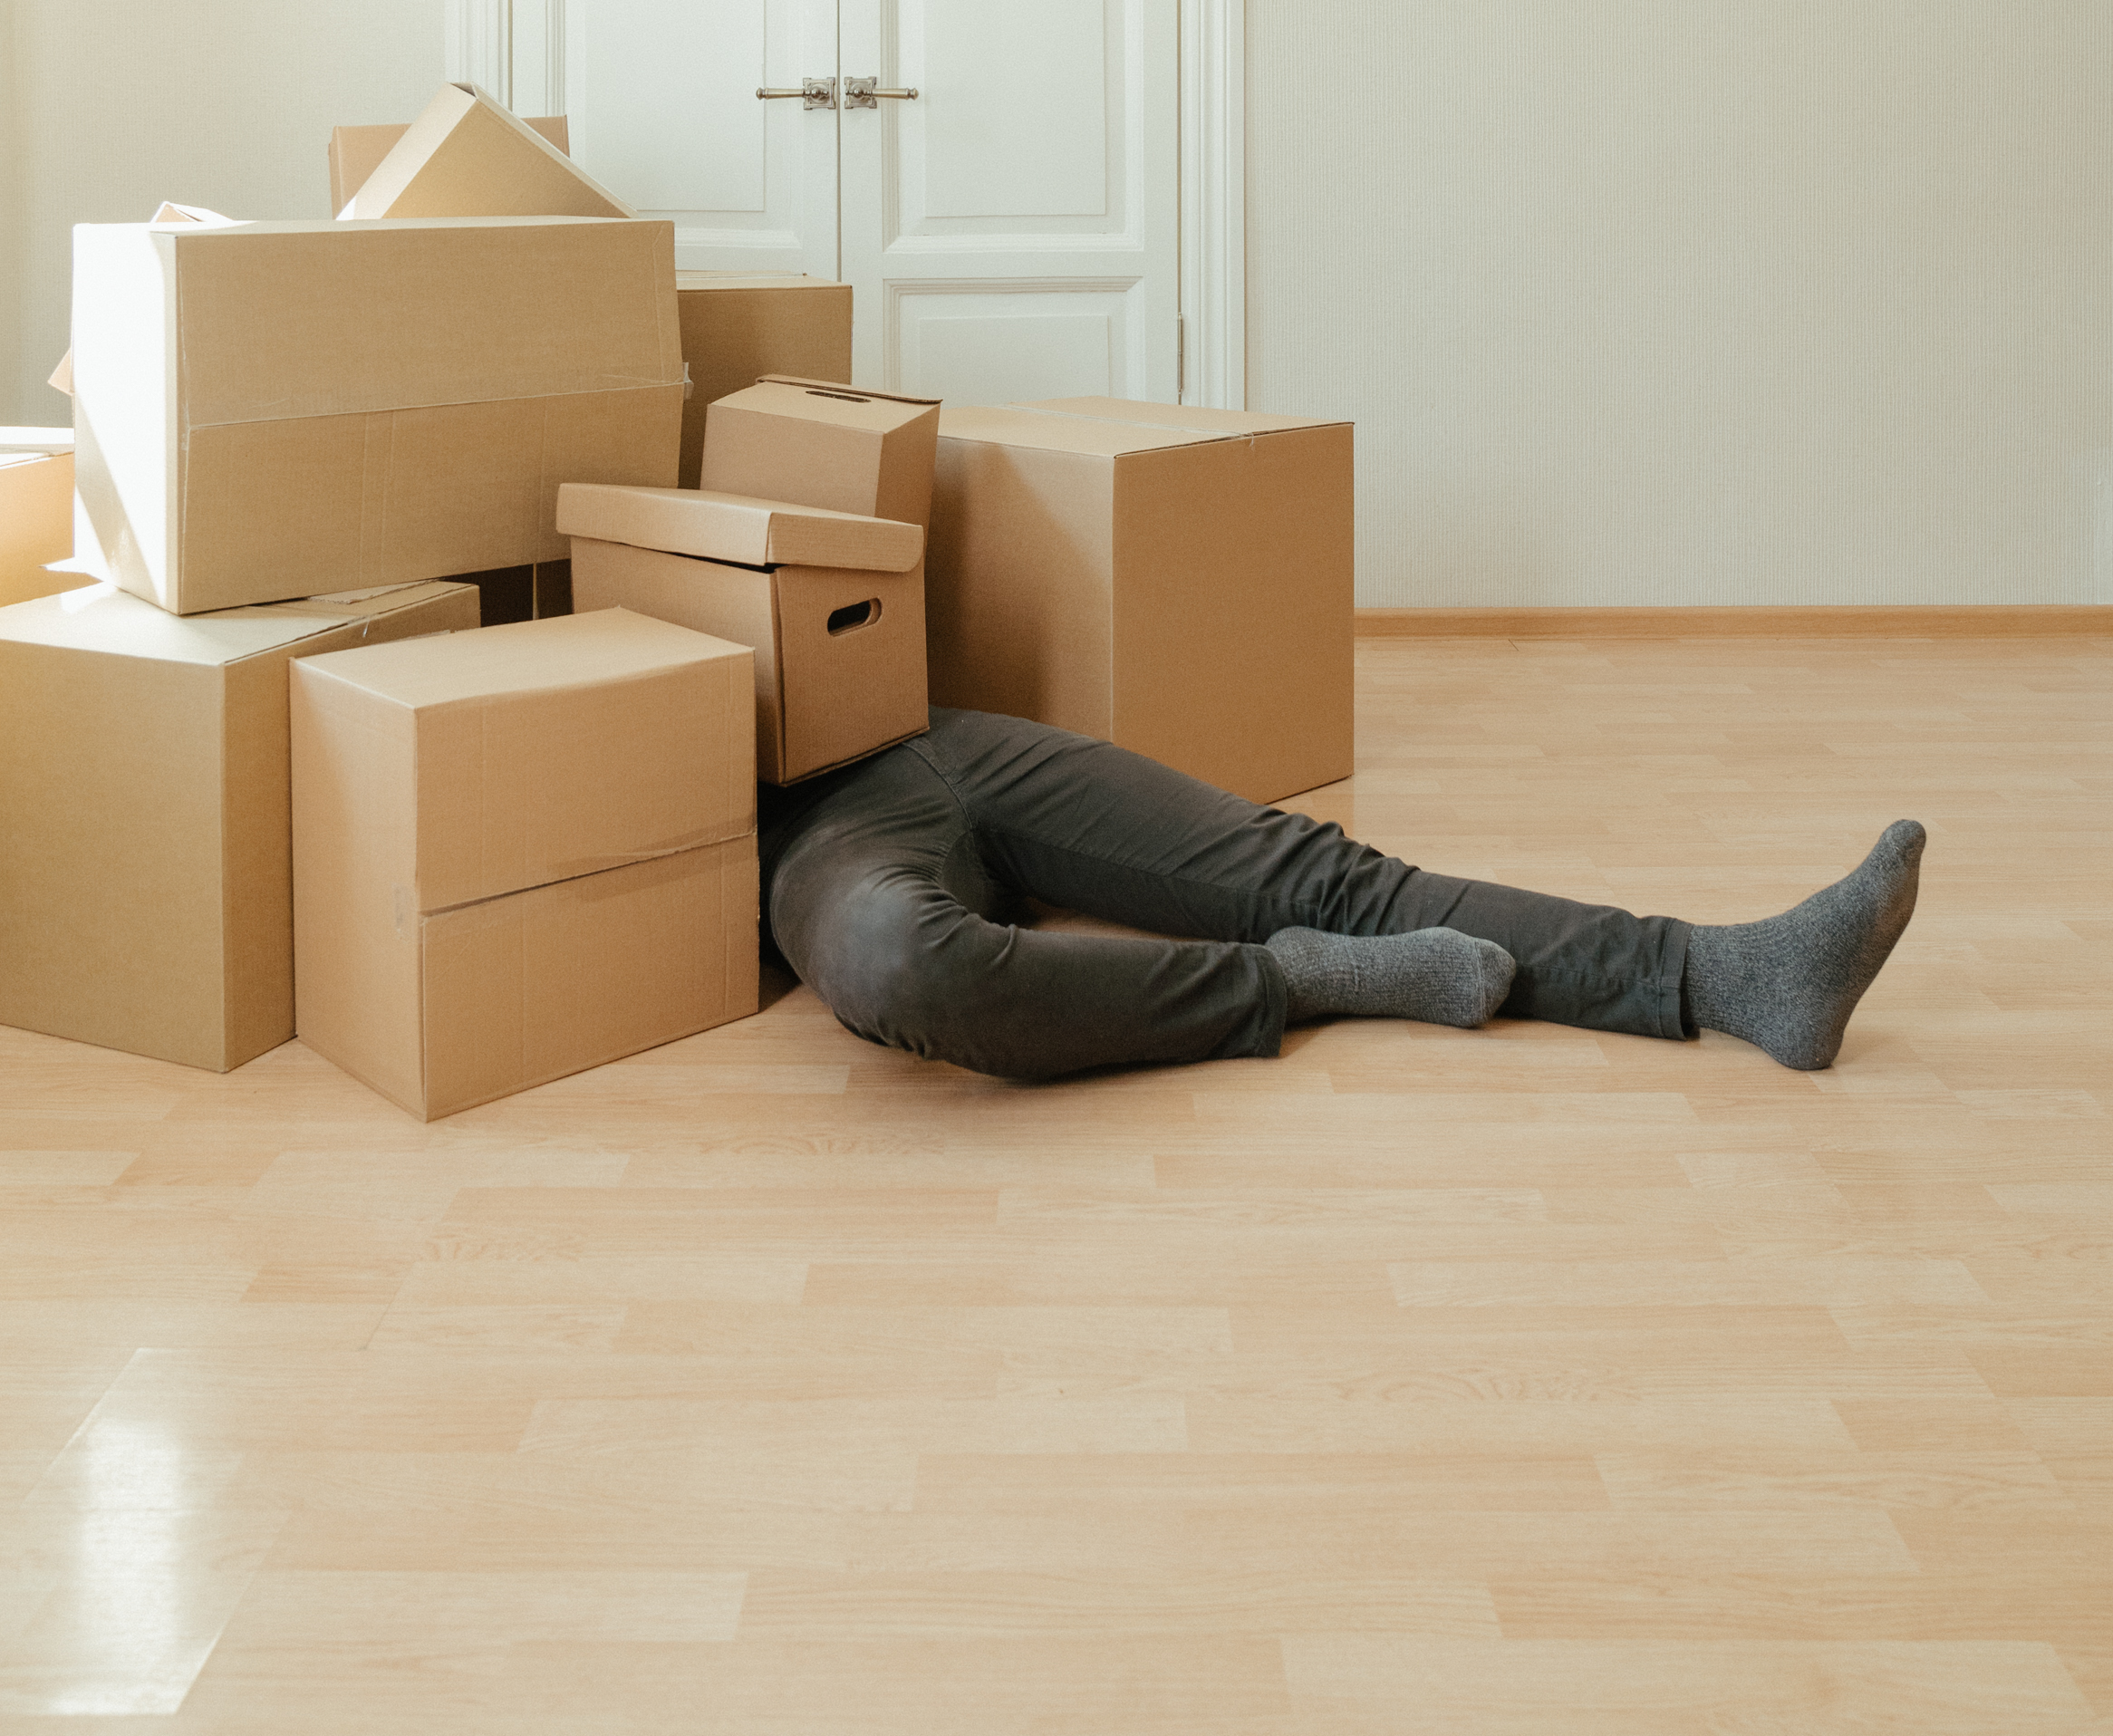 Man buried in moving boxes